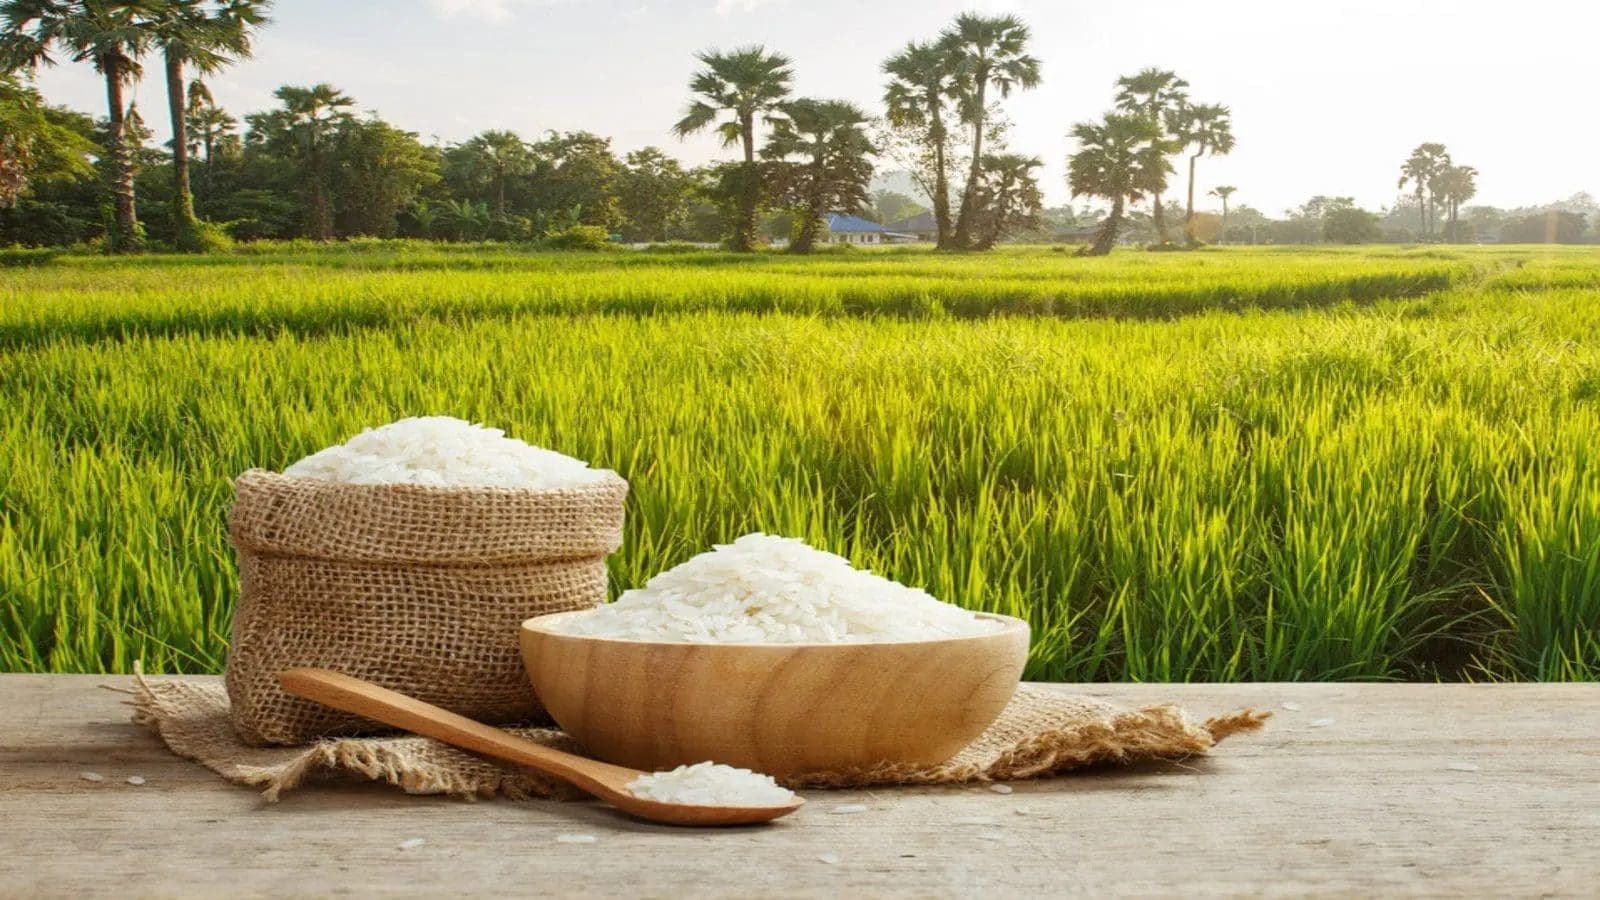 New integrated pest management technology to boost rice production in Ghana